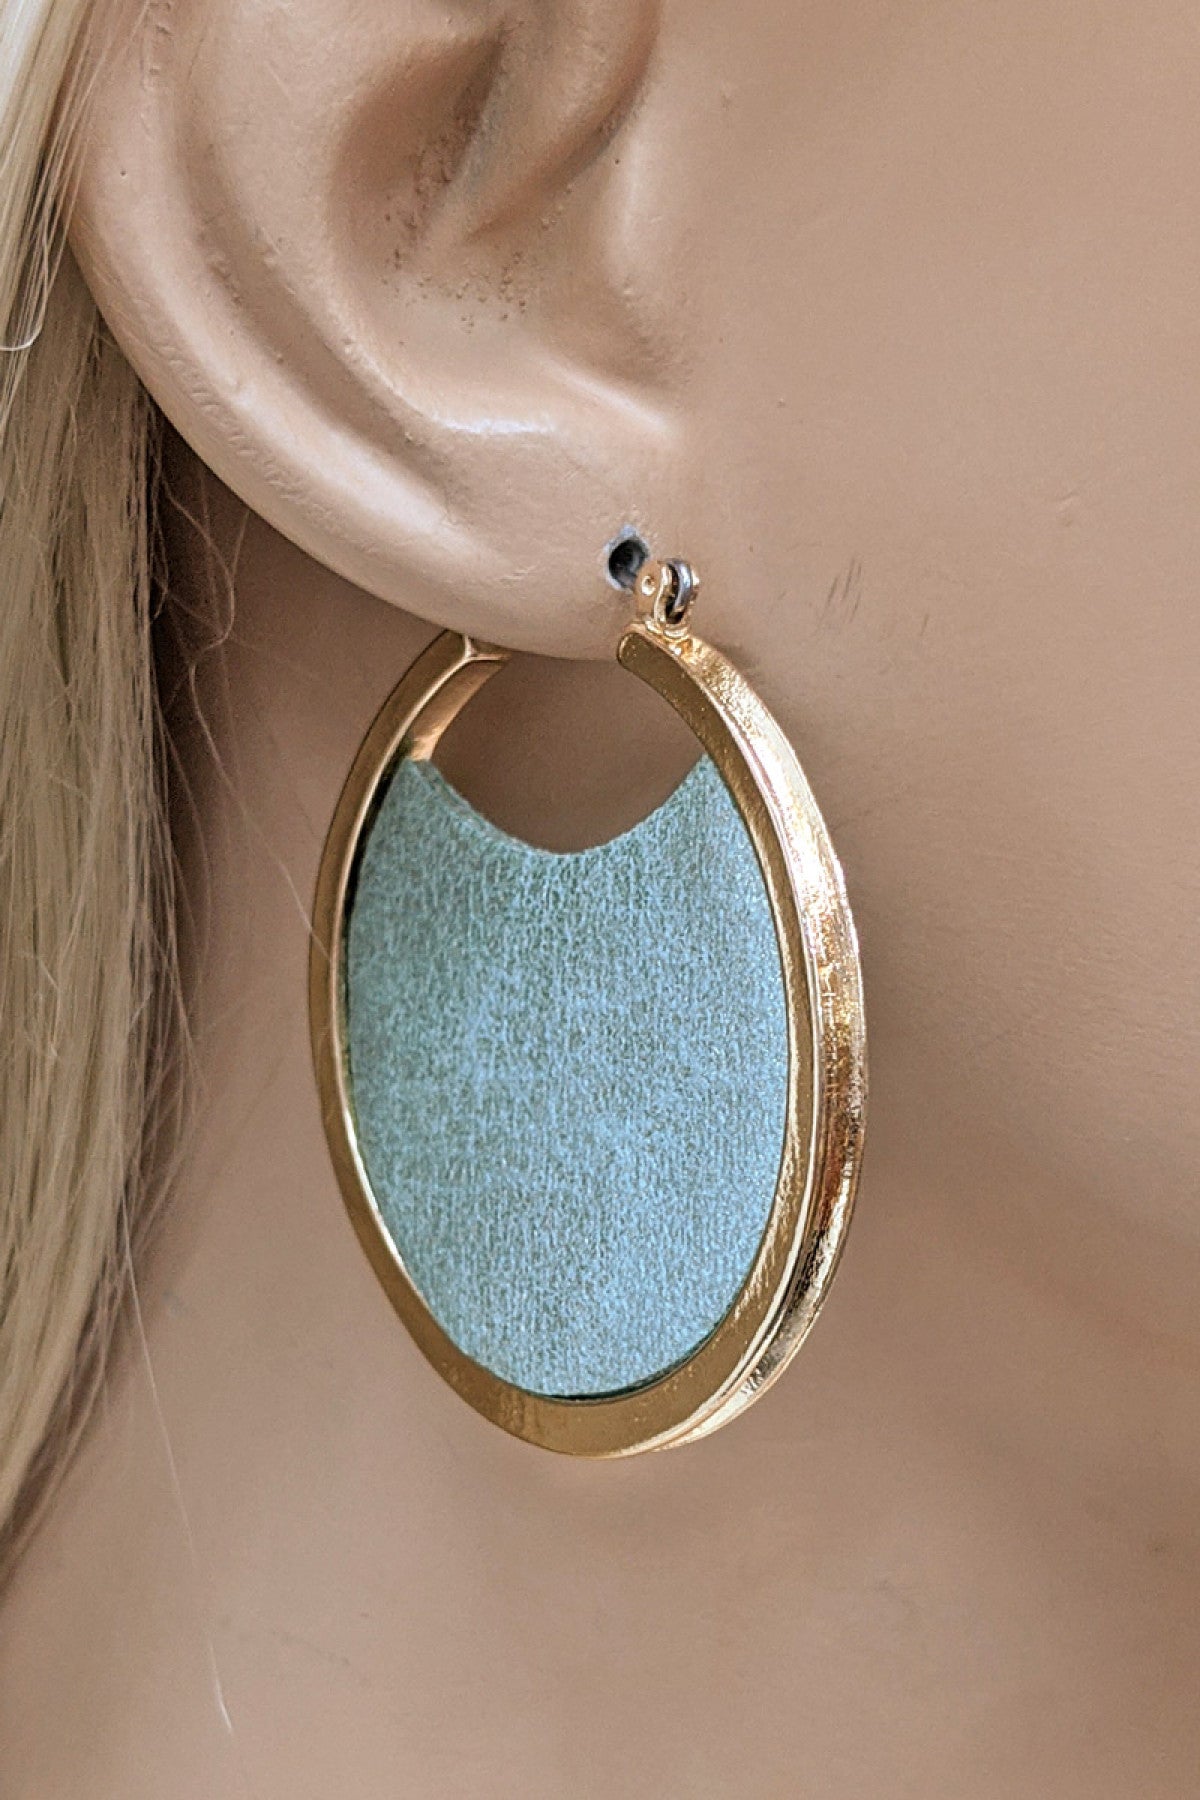 HOOP EARRINGS WITH MINT COLOR LEATHER INTERIOR DESIGN/3PAIRS